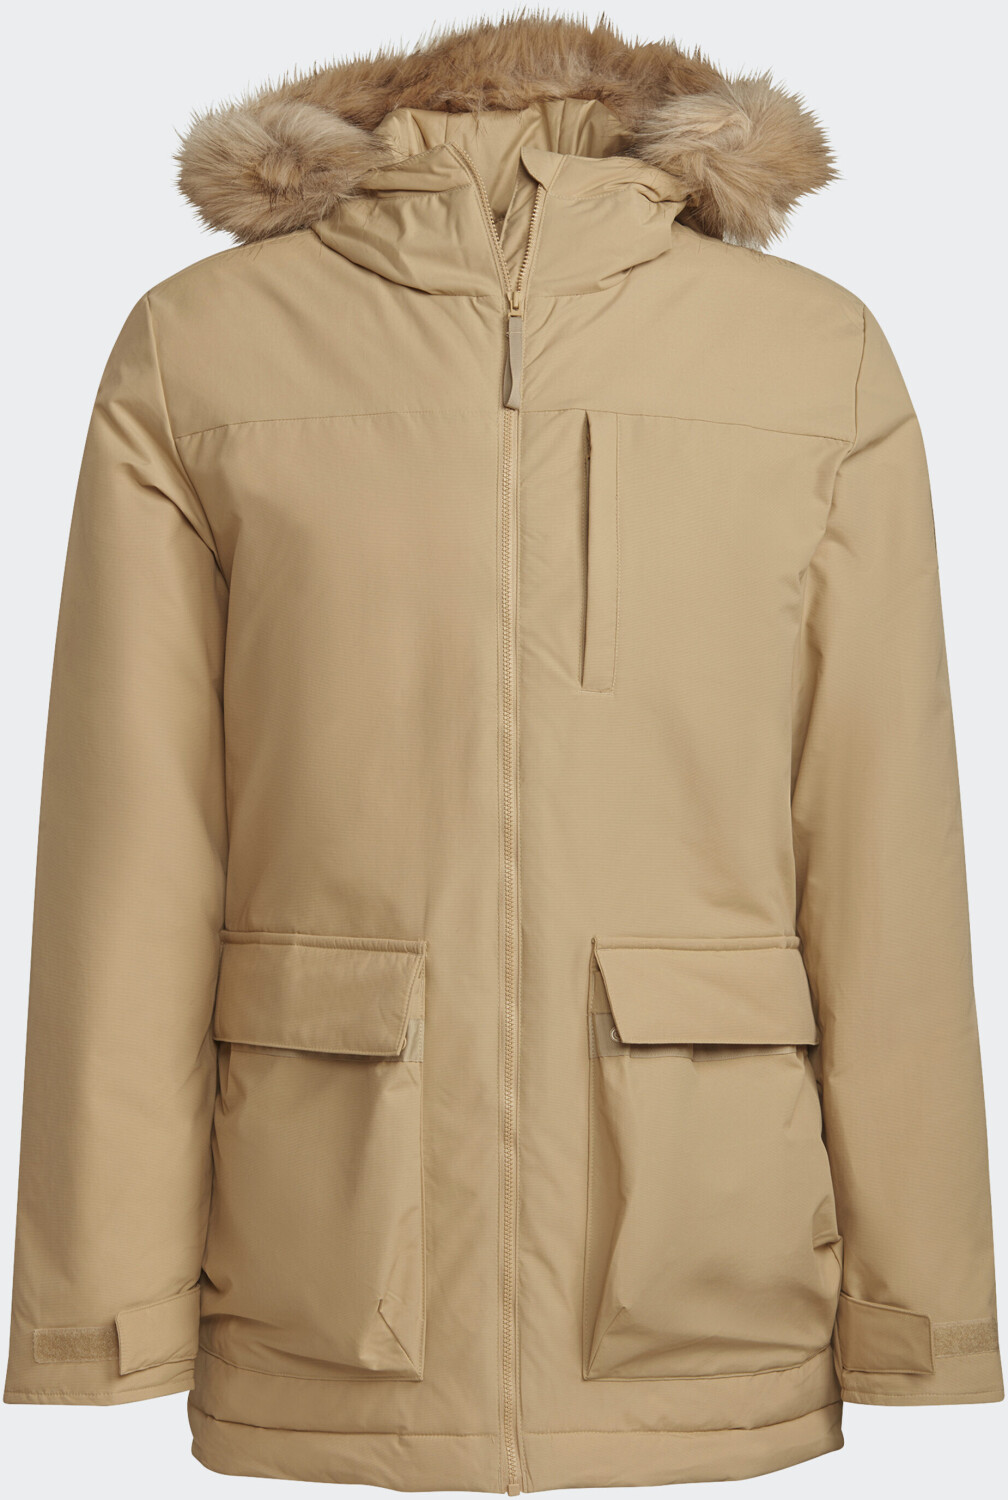 Buy Adidas Utilitas Hooded Parka from £65.00 (Today) – Best Deals on